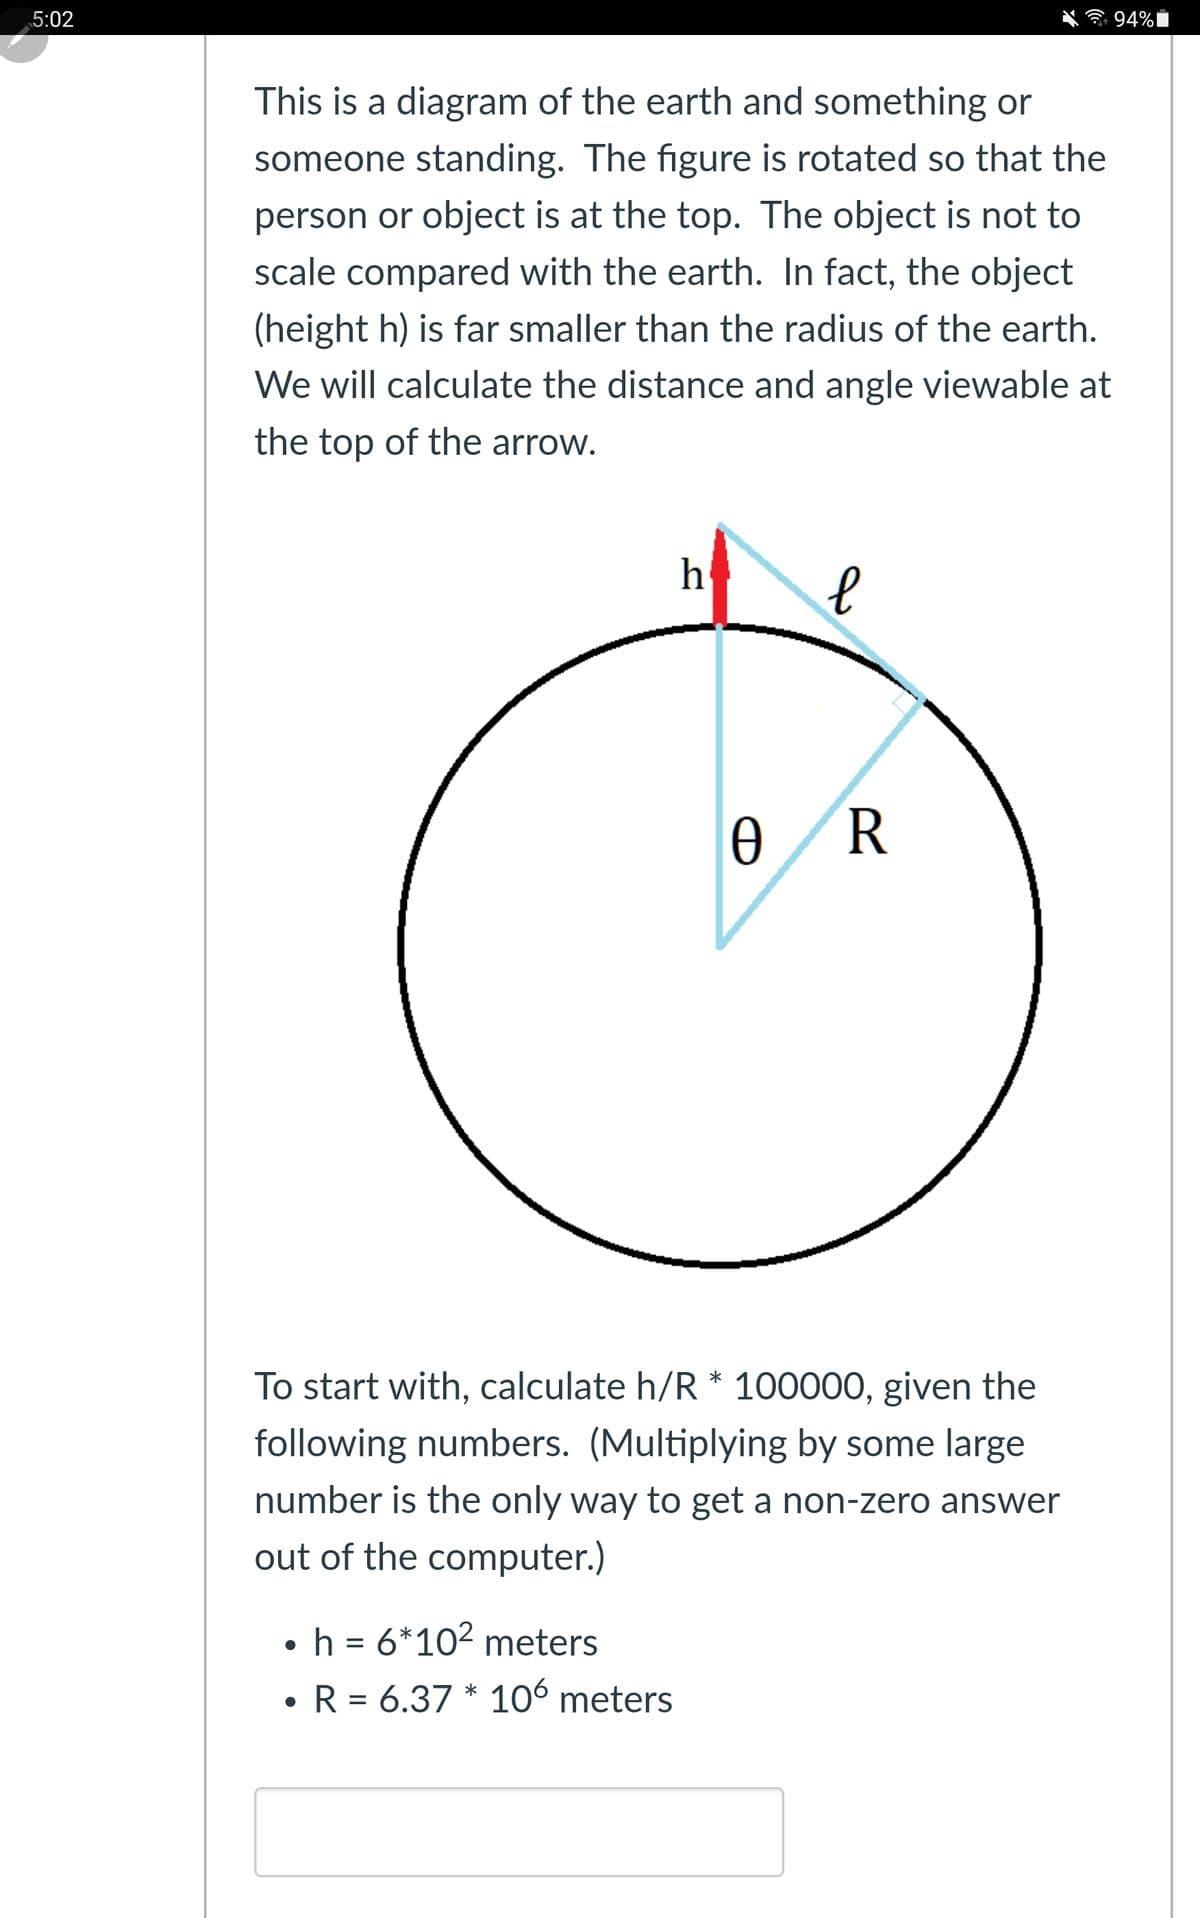 5:02
94%|
This is a diagram of the earth and something or
someone standing. The figure is rotated so that the
person or object is at the top. The object is not to
scale compared with the earth. In fact, the object
(height h) is far smaller than the radius of the earth.
We will calculate the distance and angle viewable at
the top of the arrow.
h
R
To start with, calculate h/R * 100000, given the
following numbers. (Multiplying by some large
number is the only way to get a non-zero answer
out of the computer.)
•h = 6*10? meters
R 6.37 * 106 meters
%D
